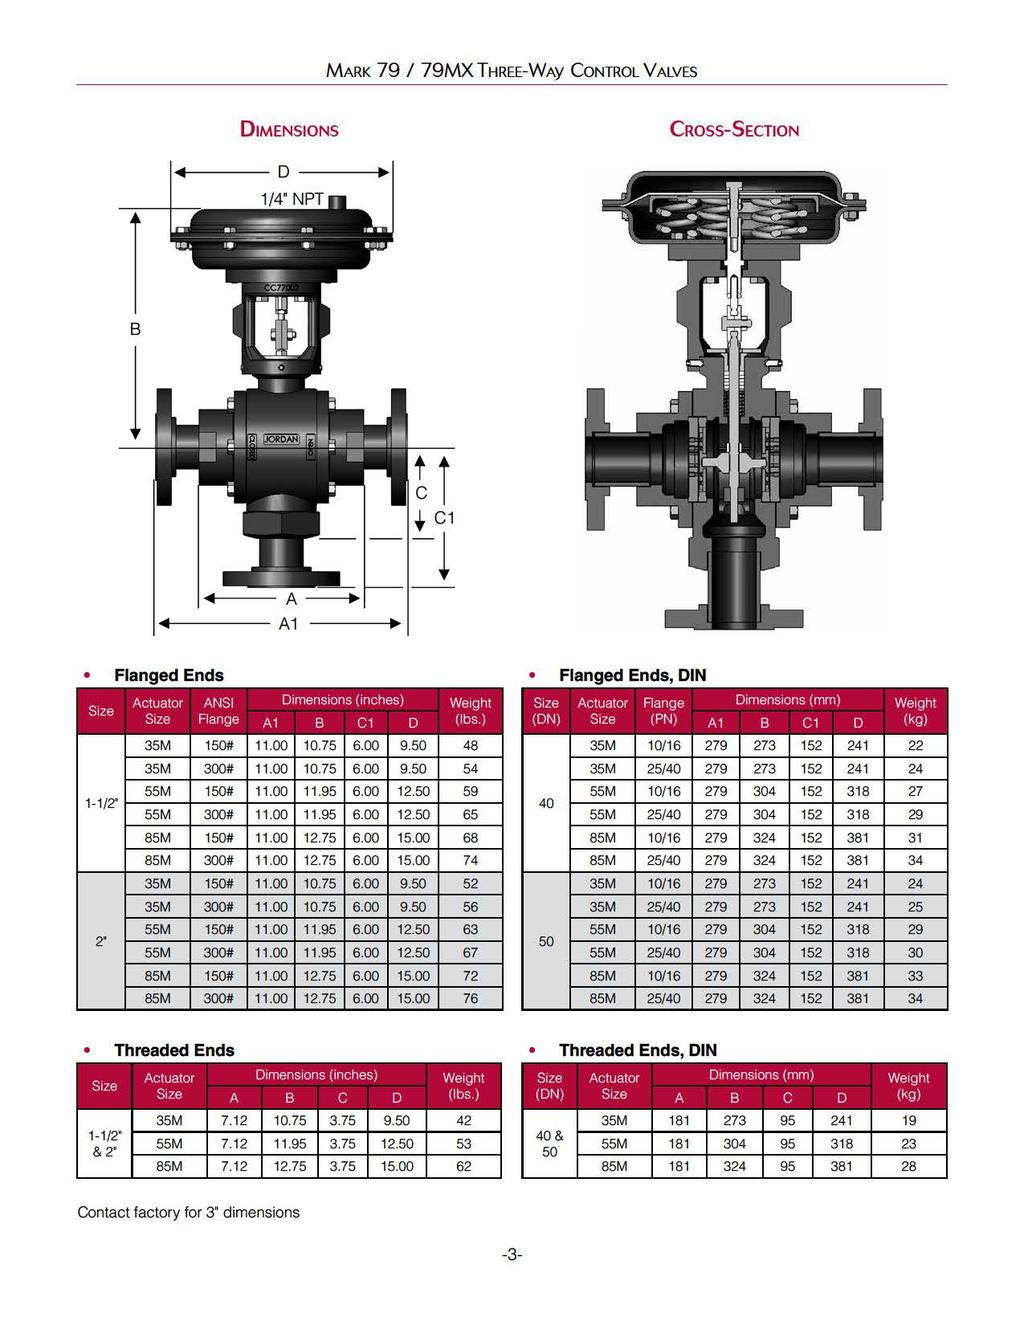 MARK 79 / 79MXTHREE-WAy CONTROL VALVES DIMENSIONS CROSS-SECTION.------A1 Flanged Ends Flanged Ends, DIN 35M 150# 11.00 10.75 6.00 9.50 48 35M 10/ 16 279 152 241 22 35 300 11.0 10.75.00 9.50 54 35 25/ 0 279 1 2 24 24 1-1/2' 55M 150# 11.